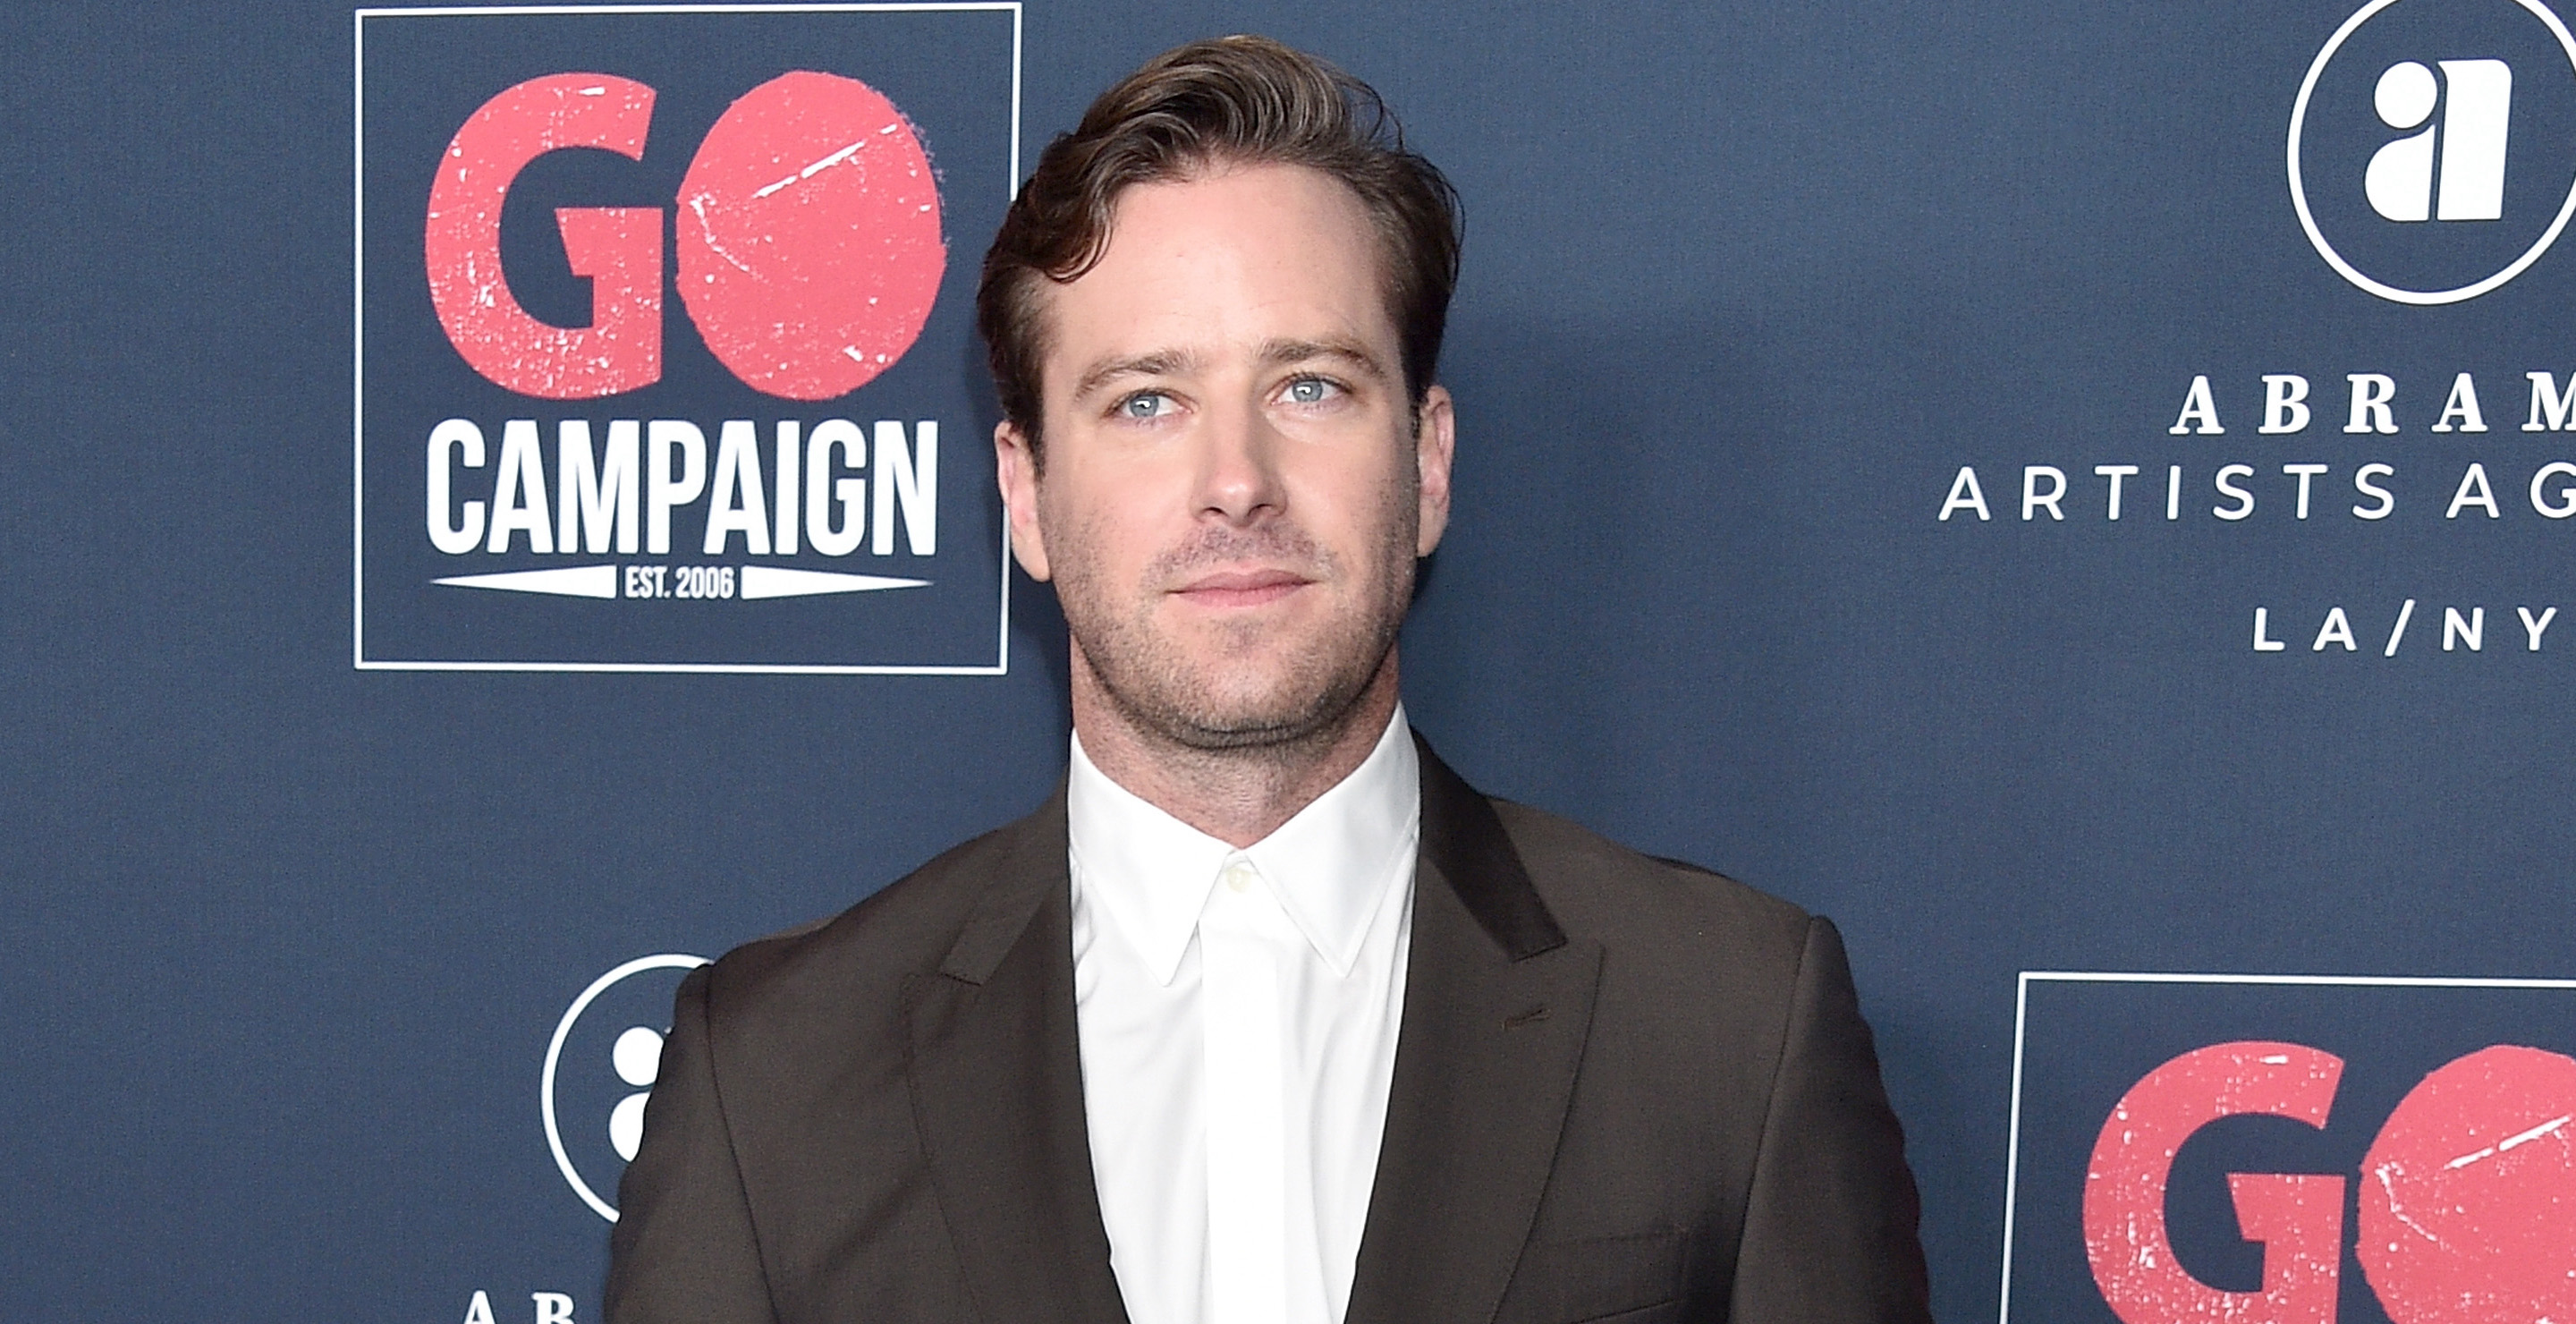 Armie Hammer's Cancel Culture Experience "Liberating"